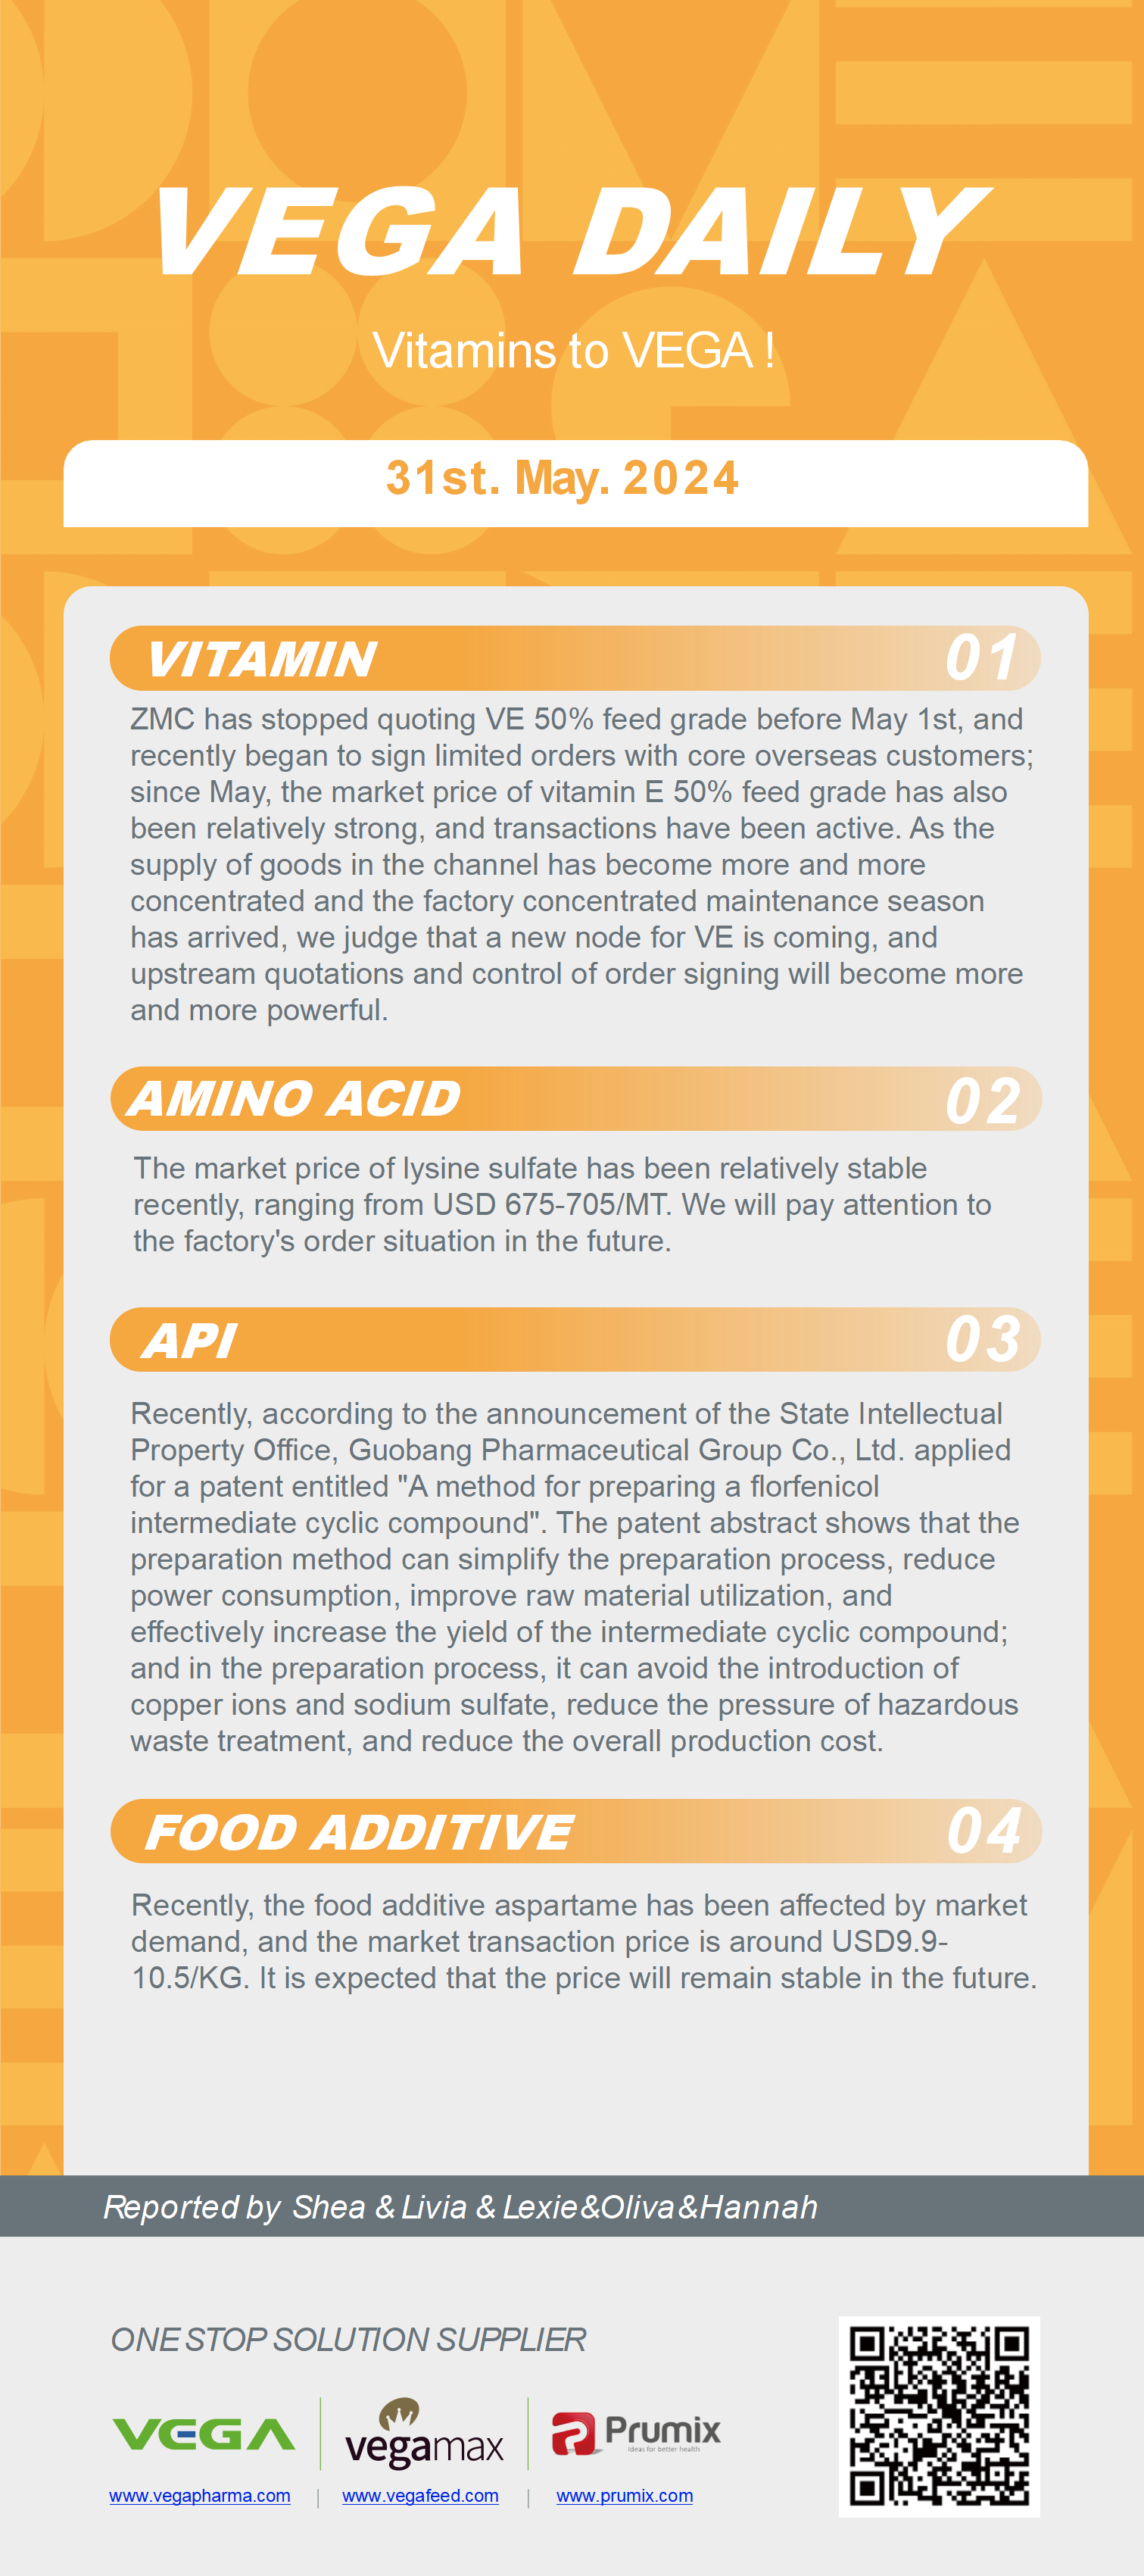 Vega Daily Dated on May 31st 2024 Vitamin Amino Acid APl Food Additives.png